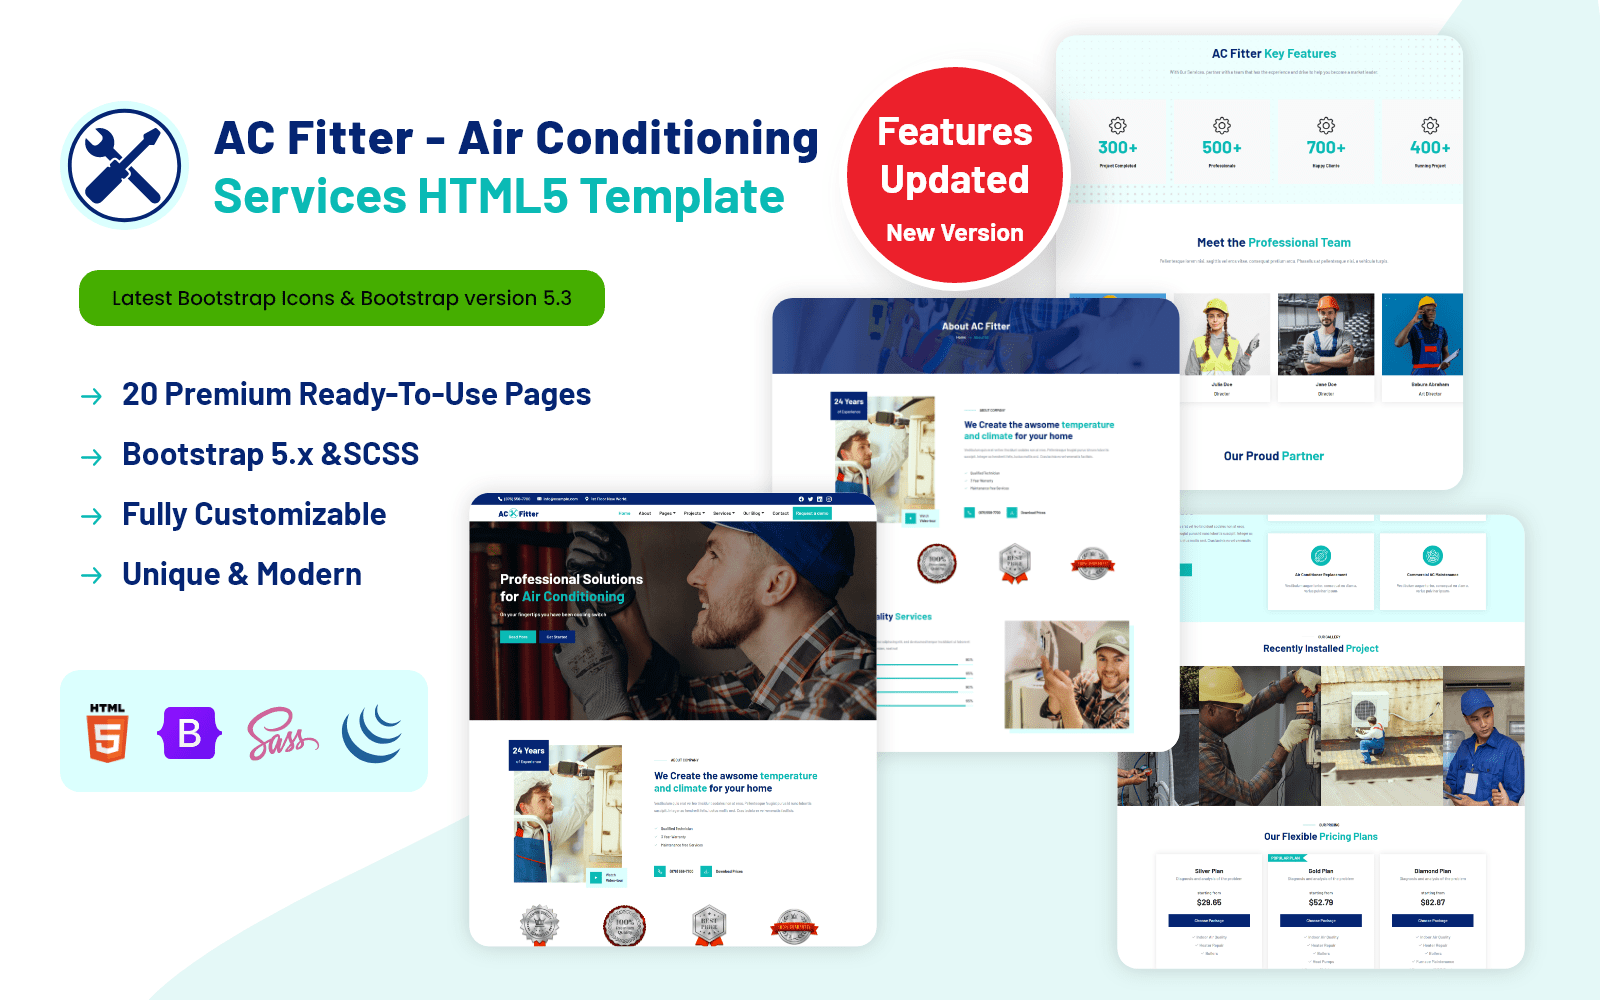 AC Fitter - Air Conditioning Services HTML5 Template Website Template